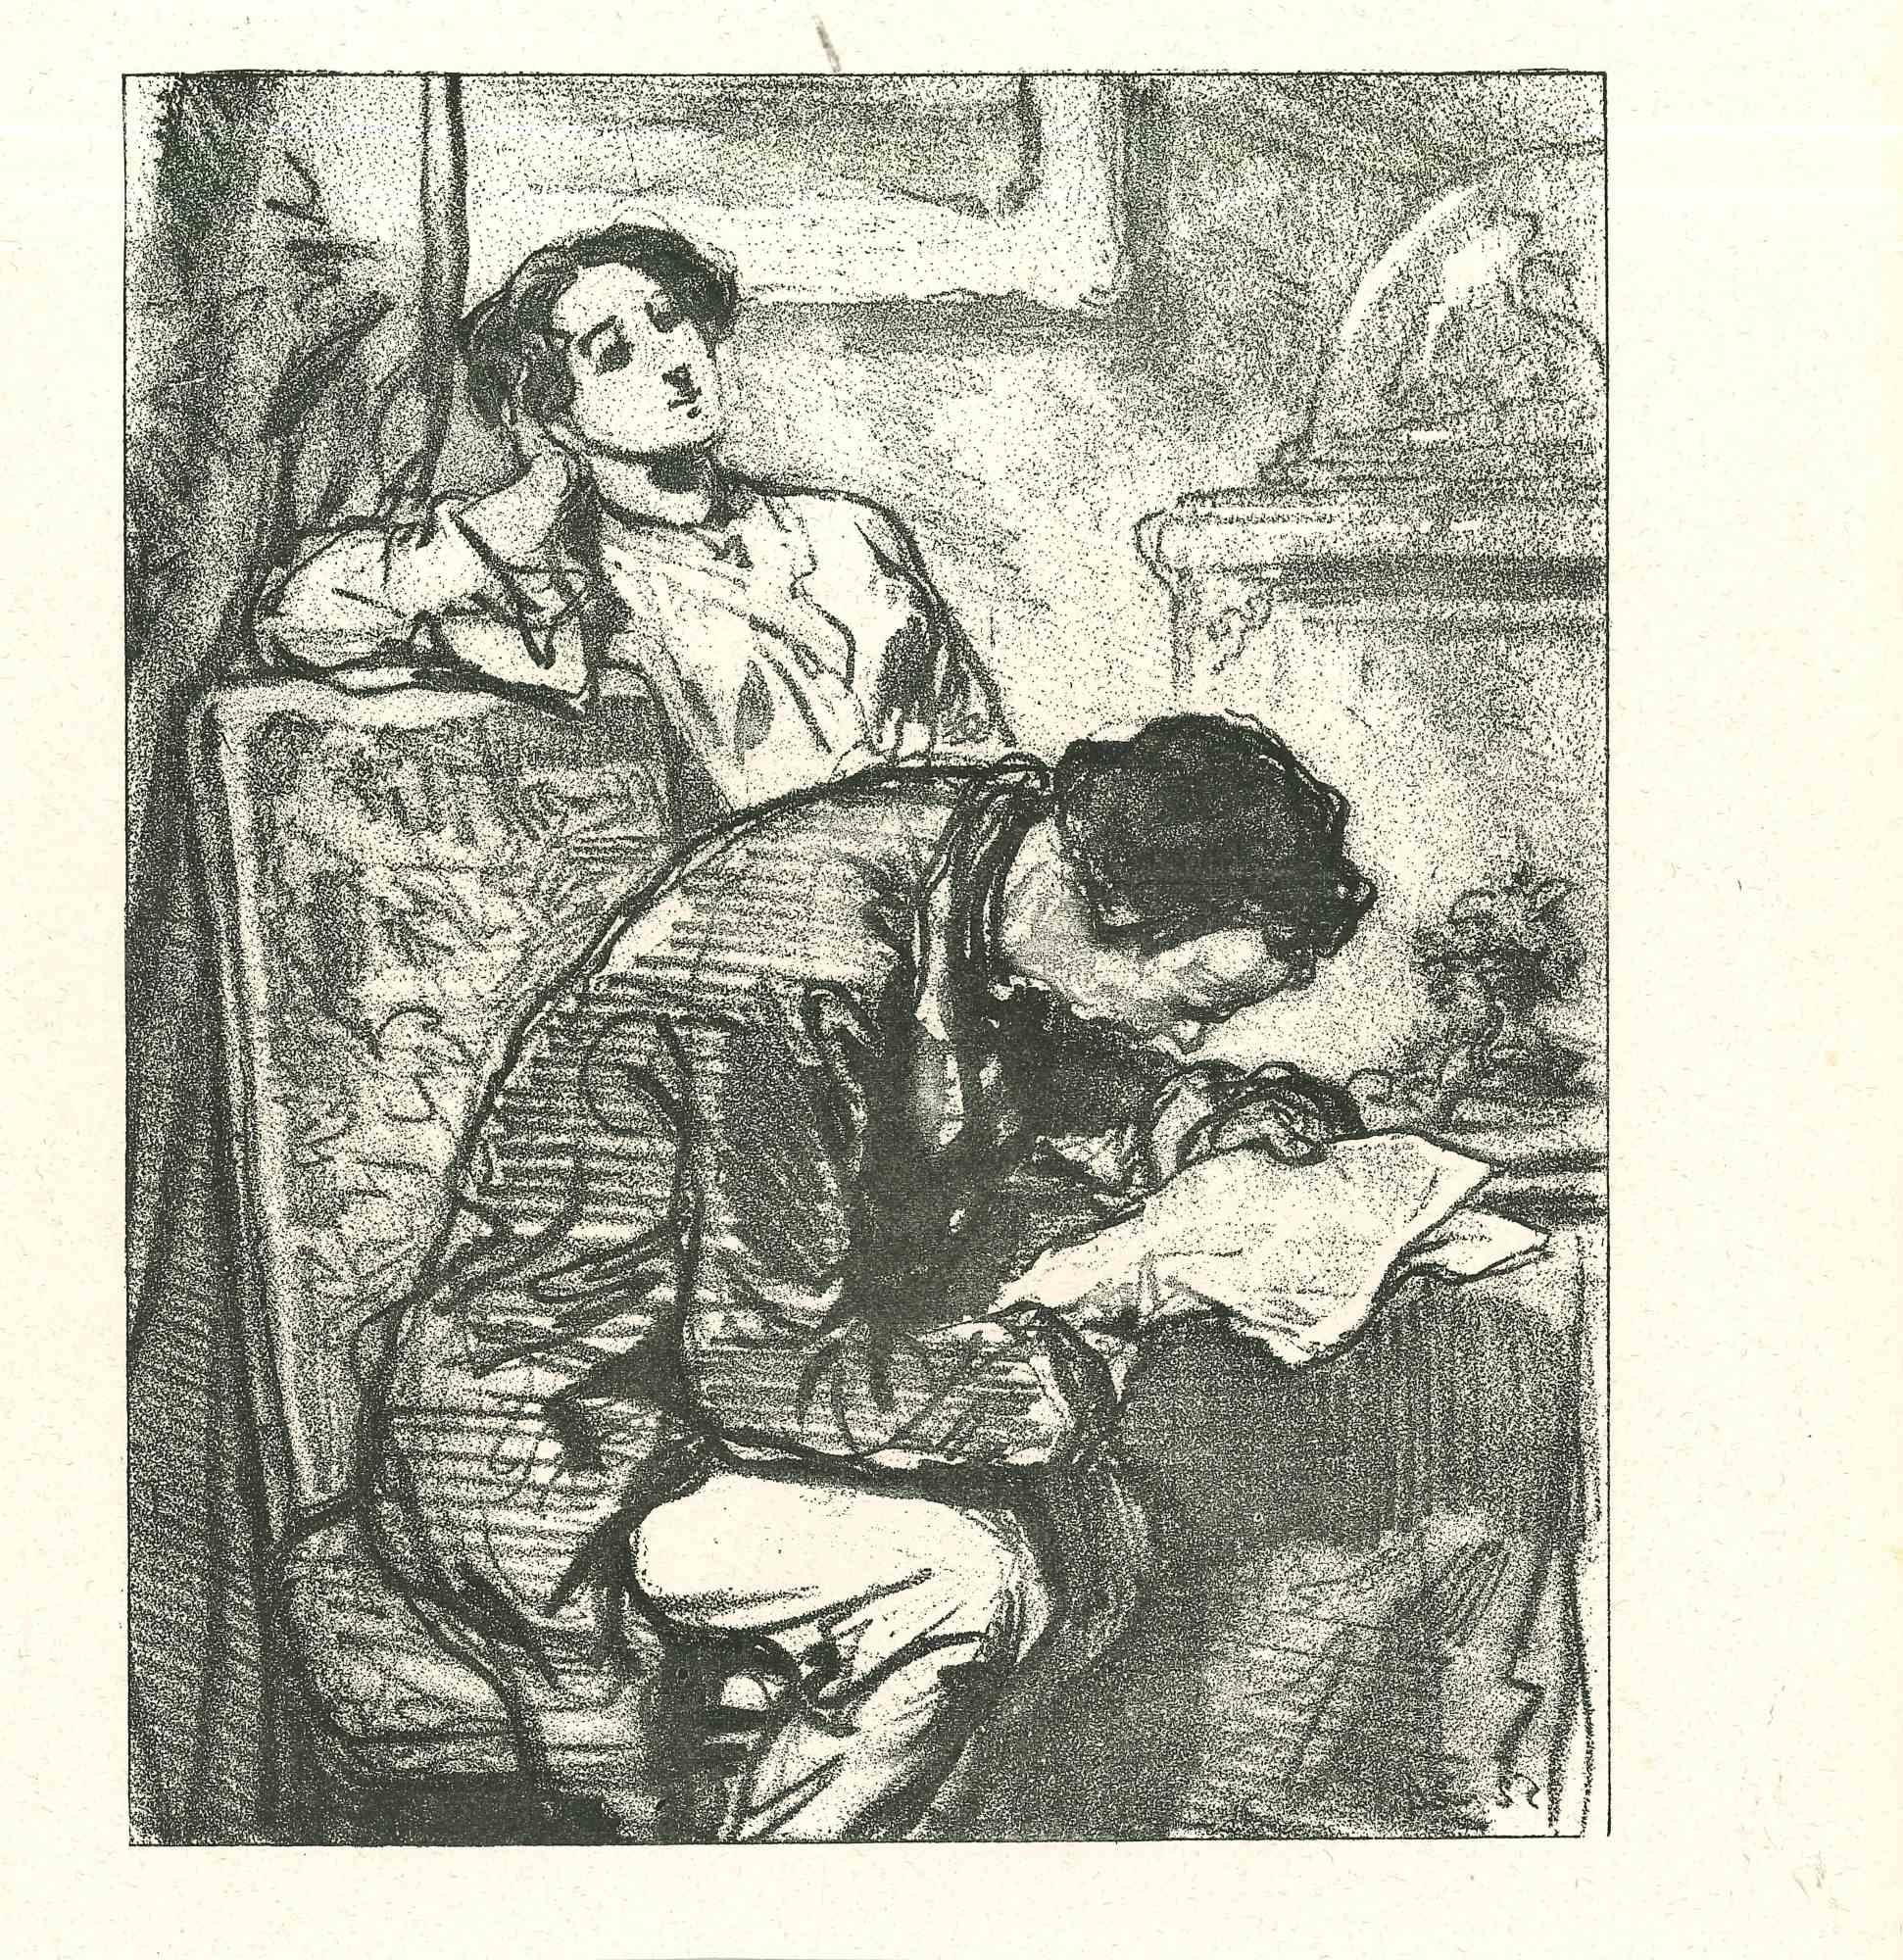 Reading the news is an original lithograph artwork on ivory-colored paper, realized by the French draftsman Paul Gavarni (after) (alias Guillaume Sulpice Chevalier Gavarni, 1804-1866) in Paris, 1881, in the collection of Illustrations for "La